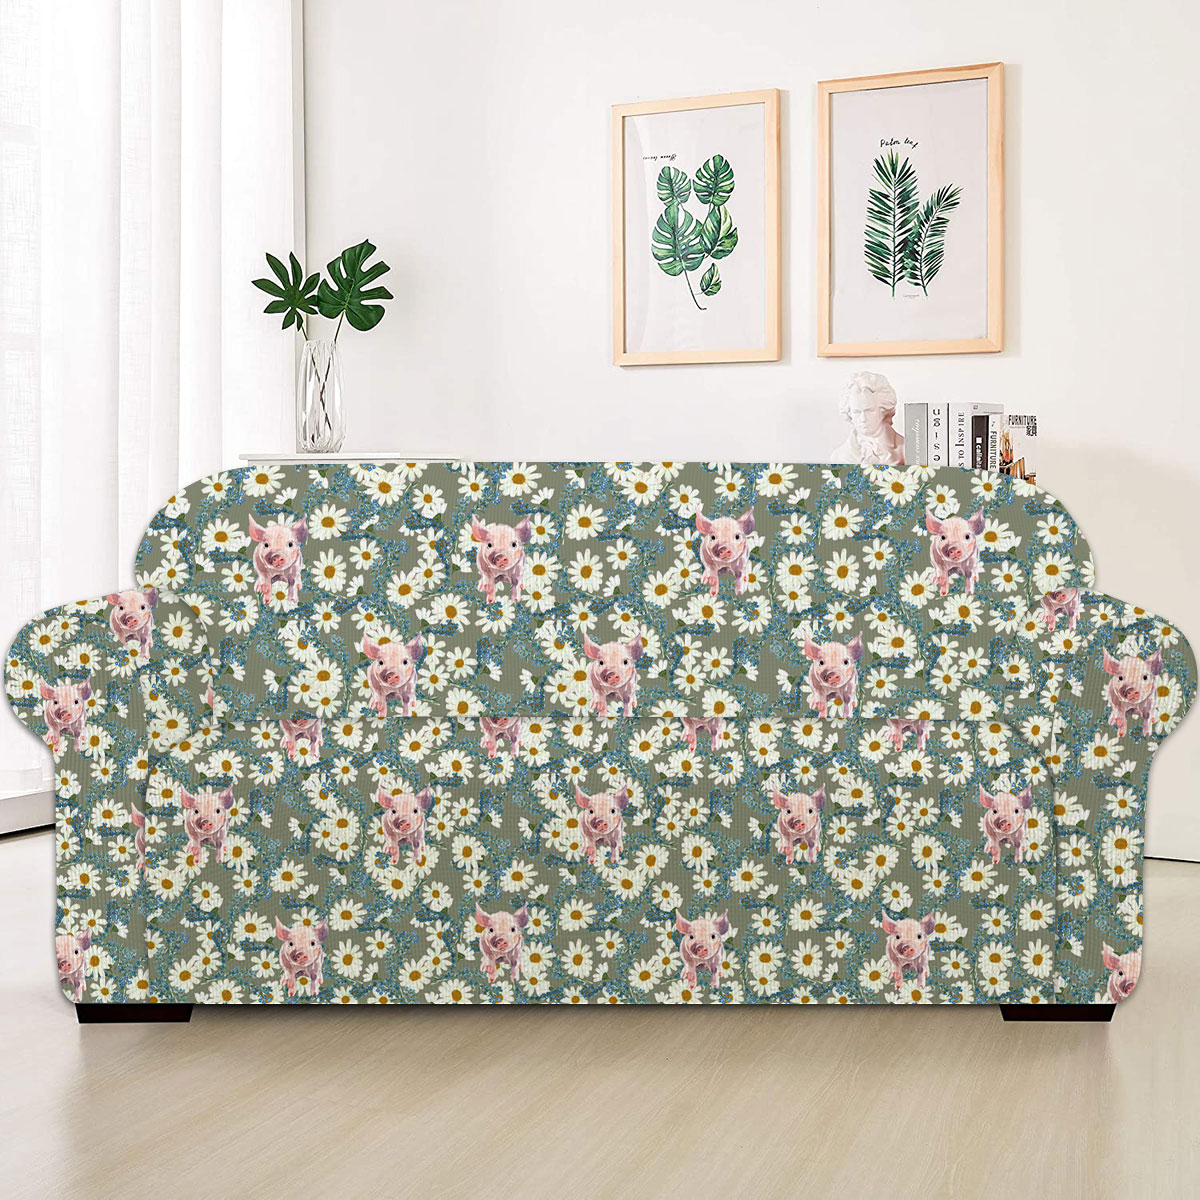 Pig Camomilles Flower Grey Pattern Sofa Cover